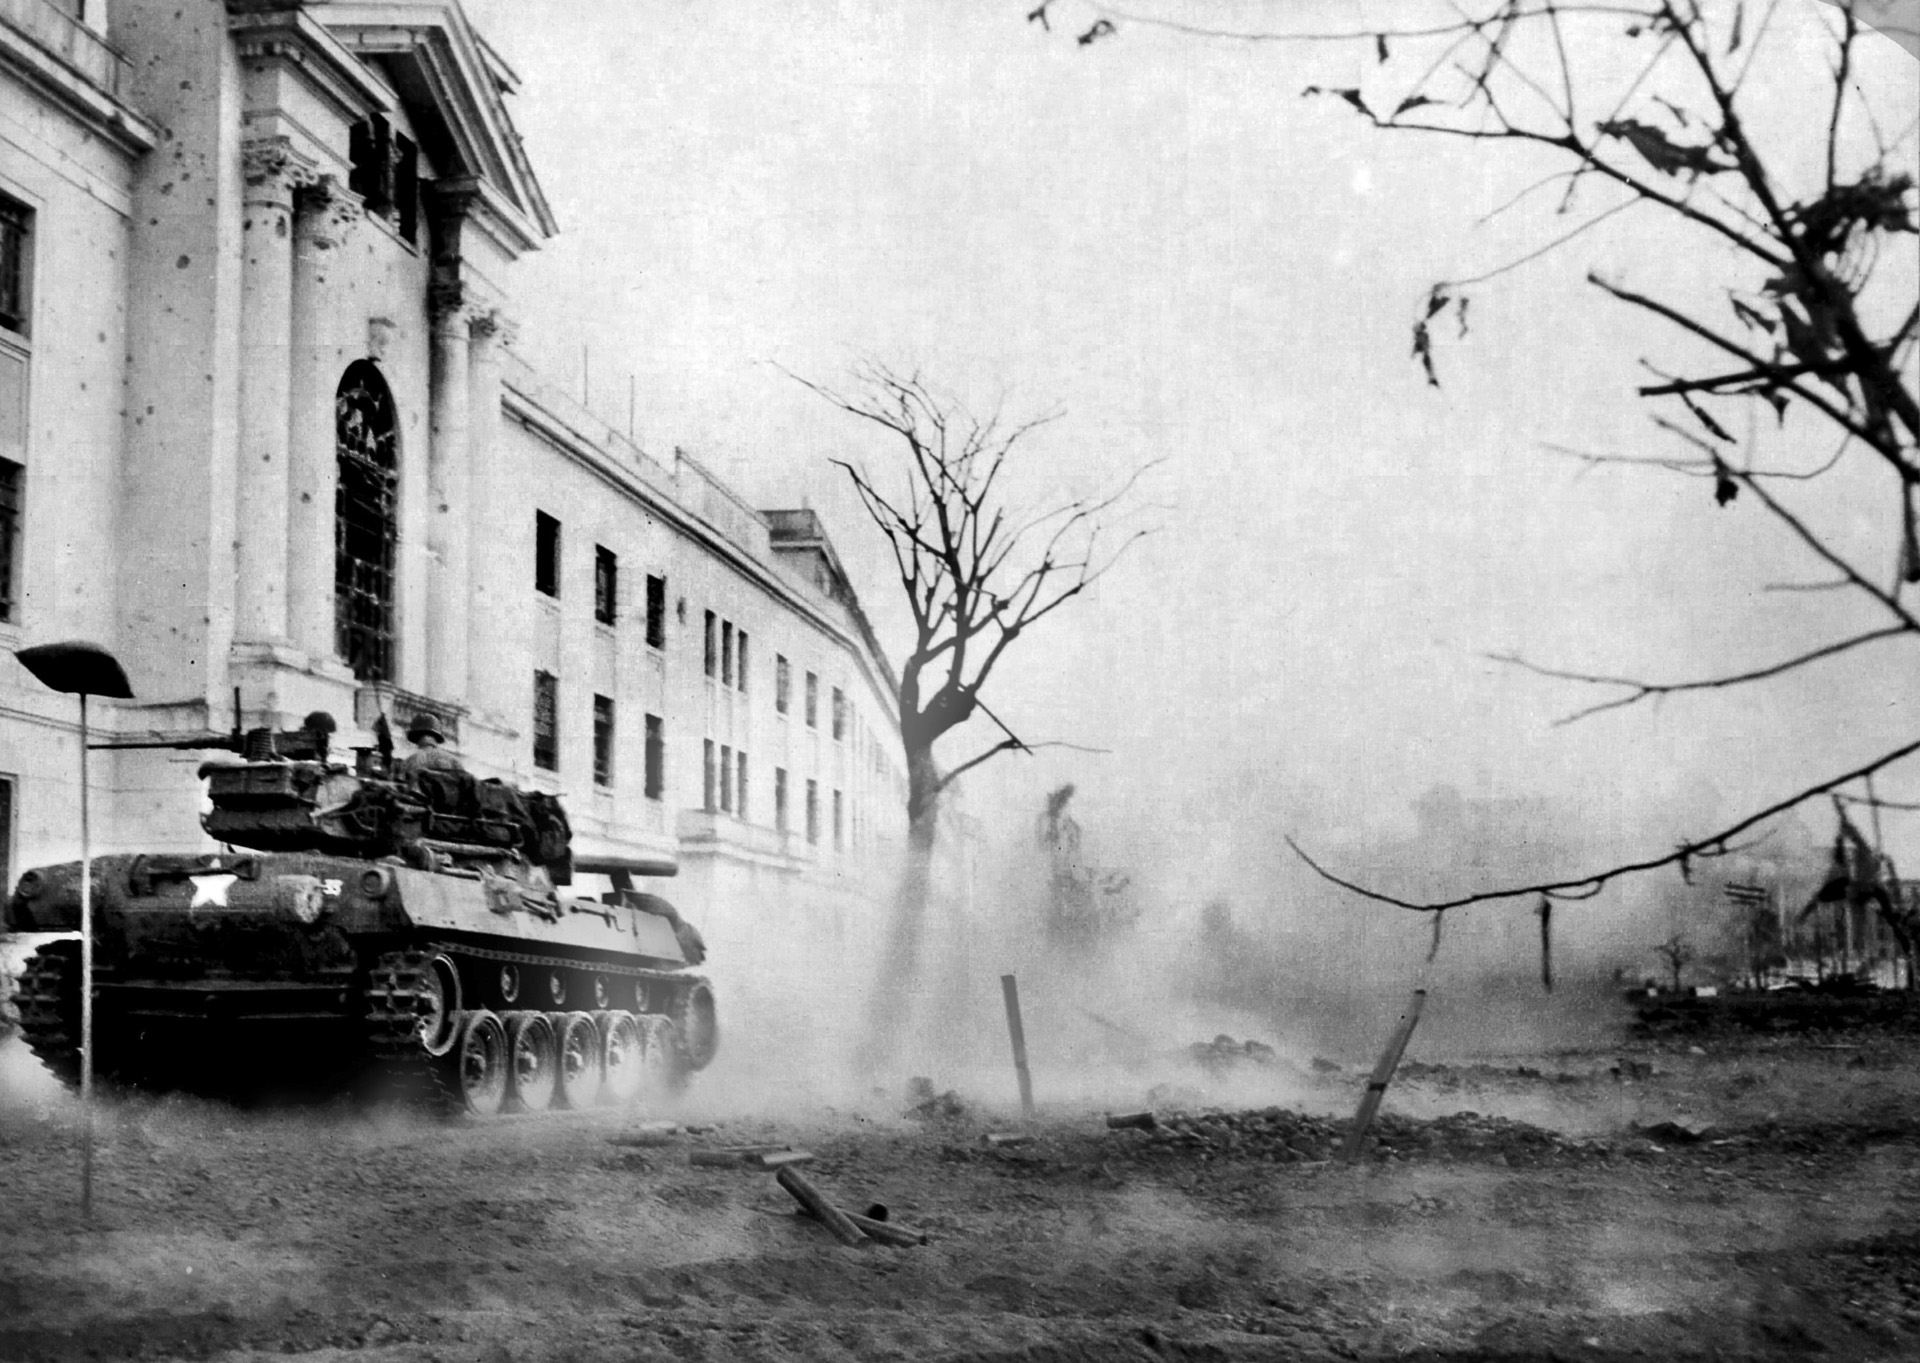 Fighting erupted in Manila itself as the Americans fought their way into the city. In this photo, an American tank destroyer engages Japanese forces near the Filipino legislature building. 